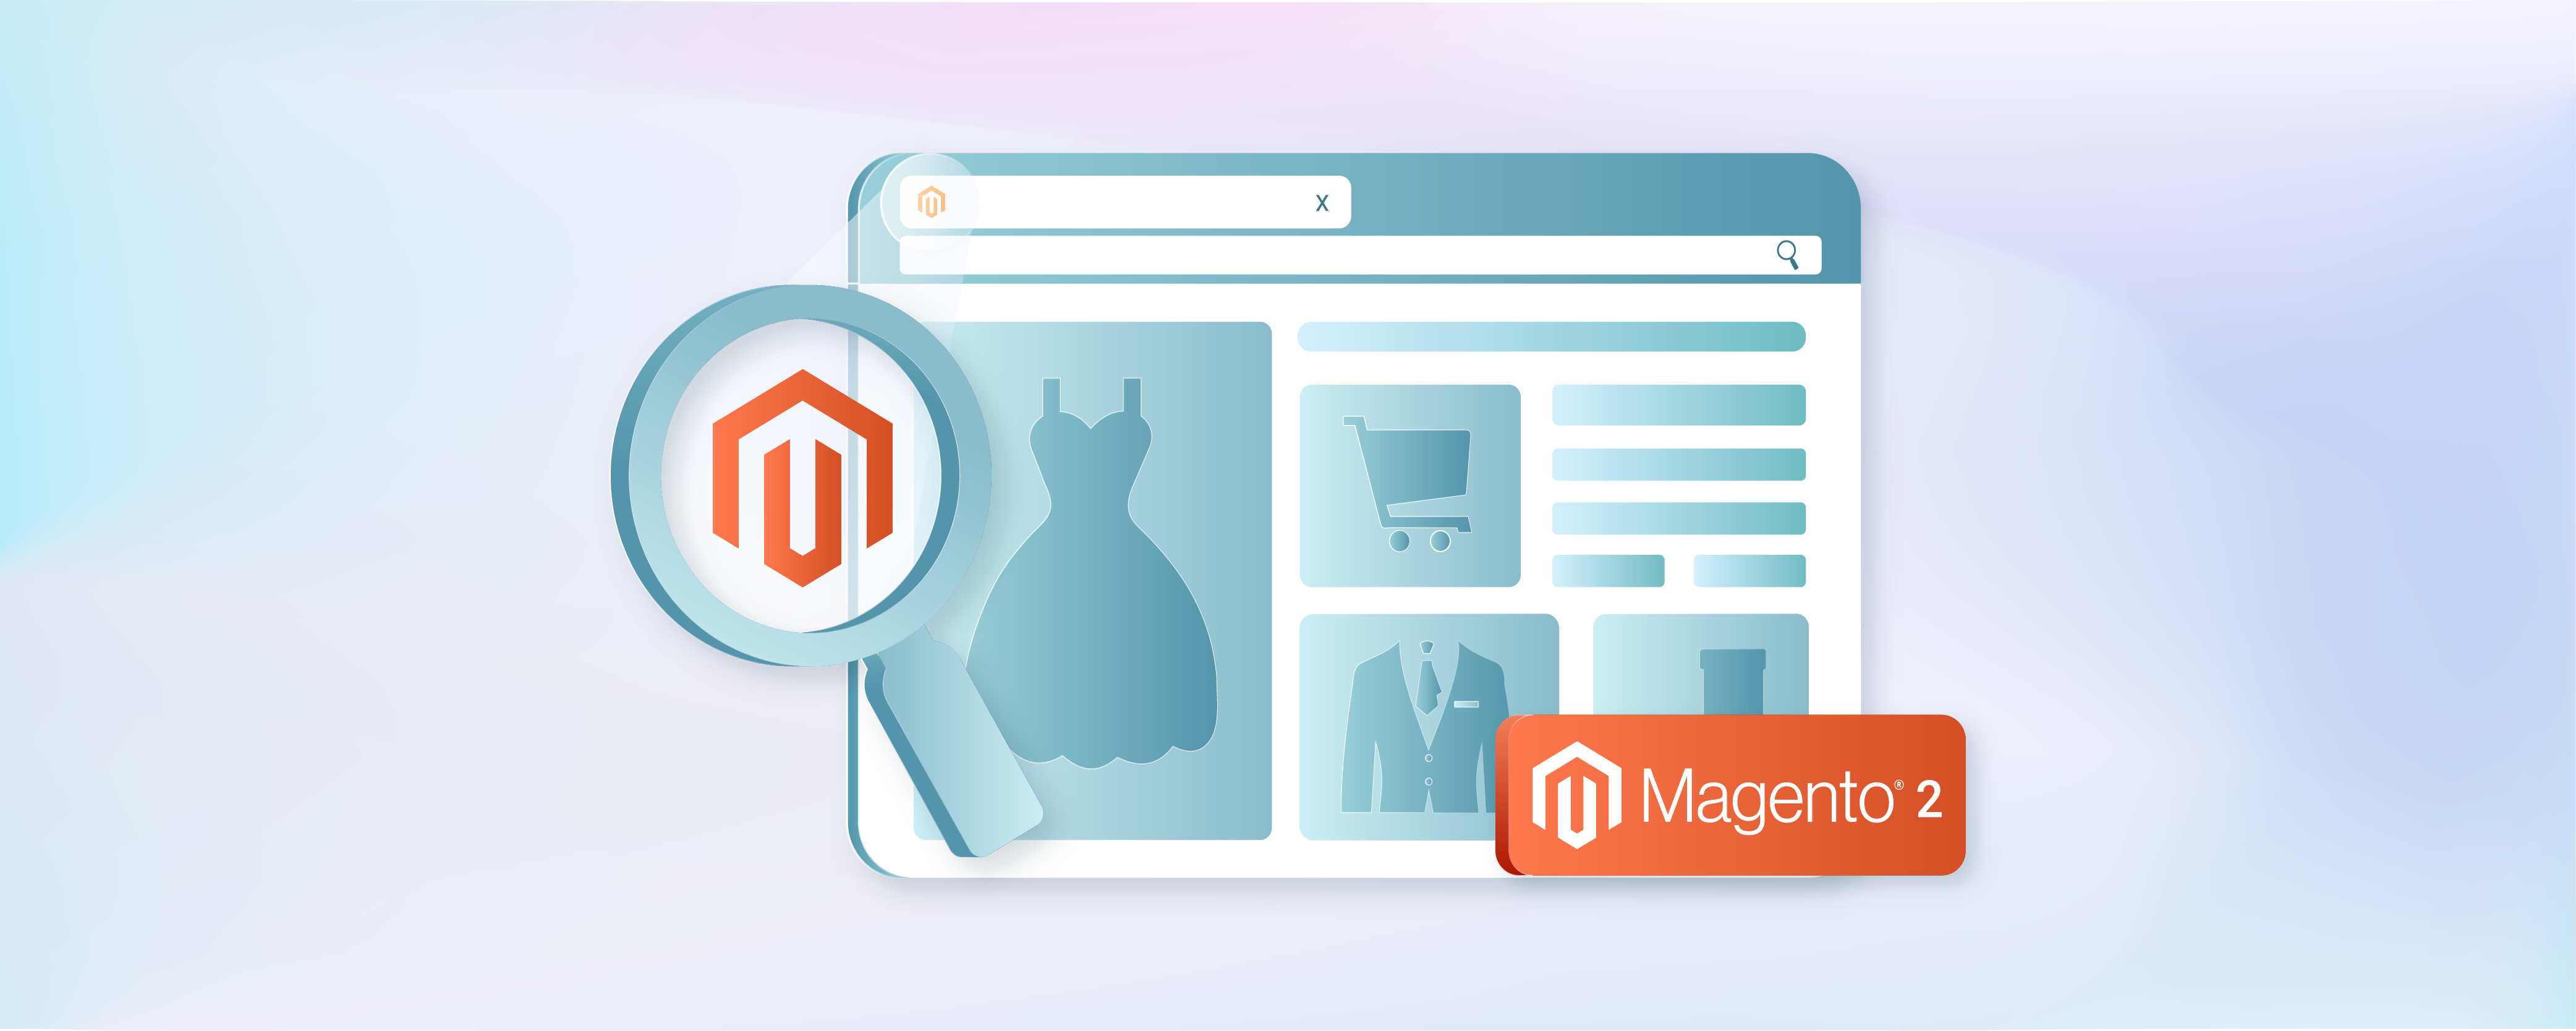 10 Easy Steps to Change Favicon in Magento 2